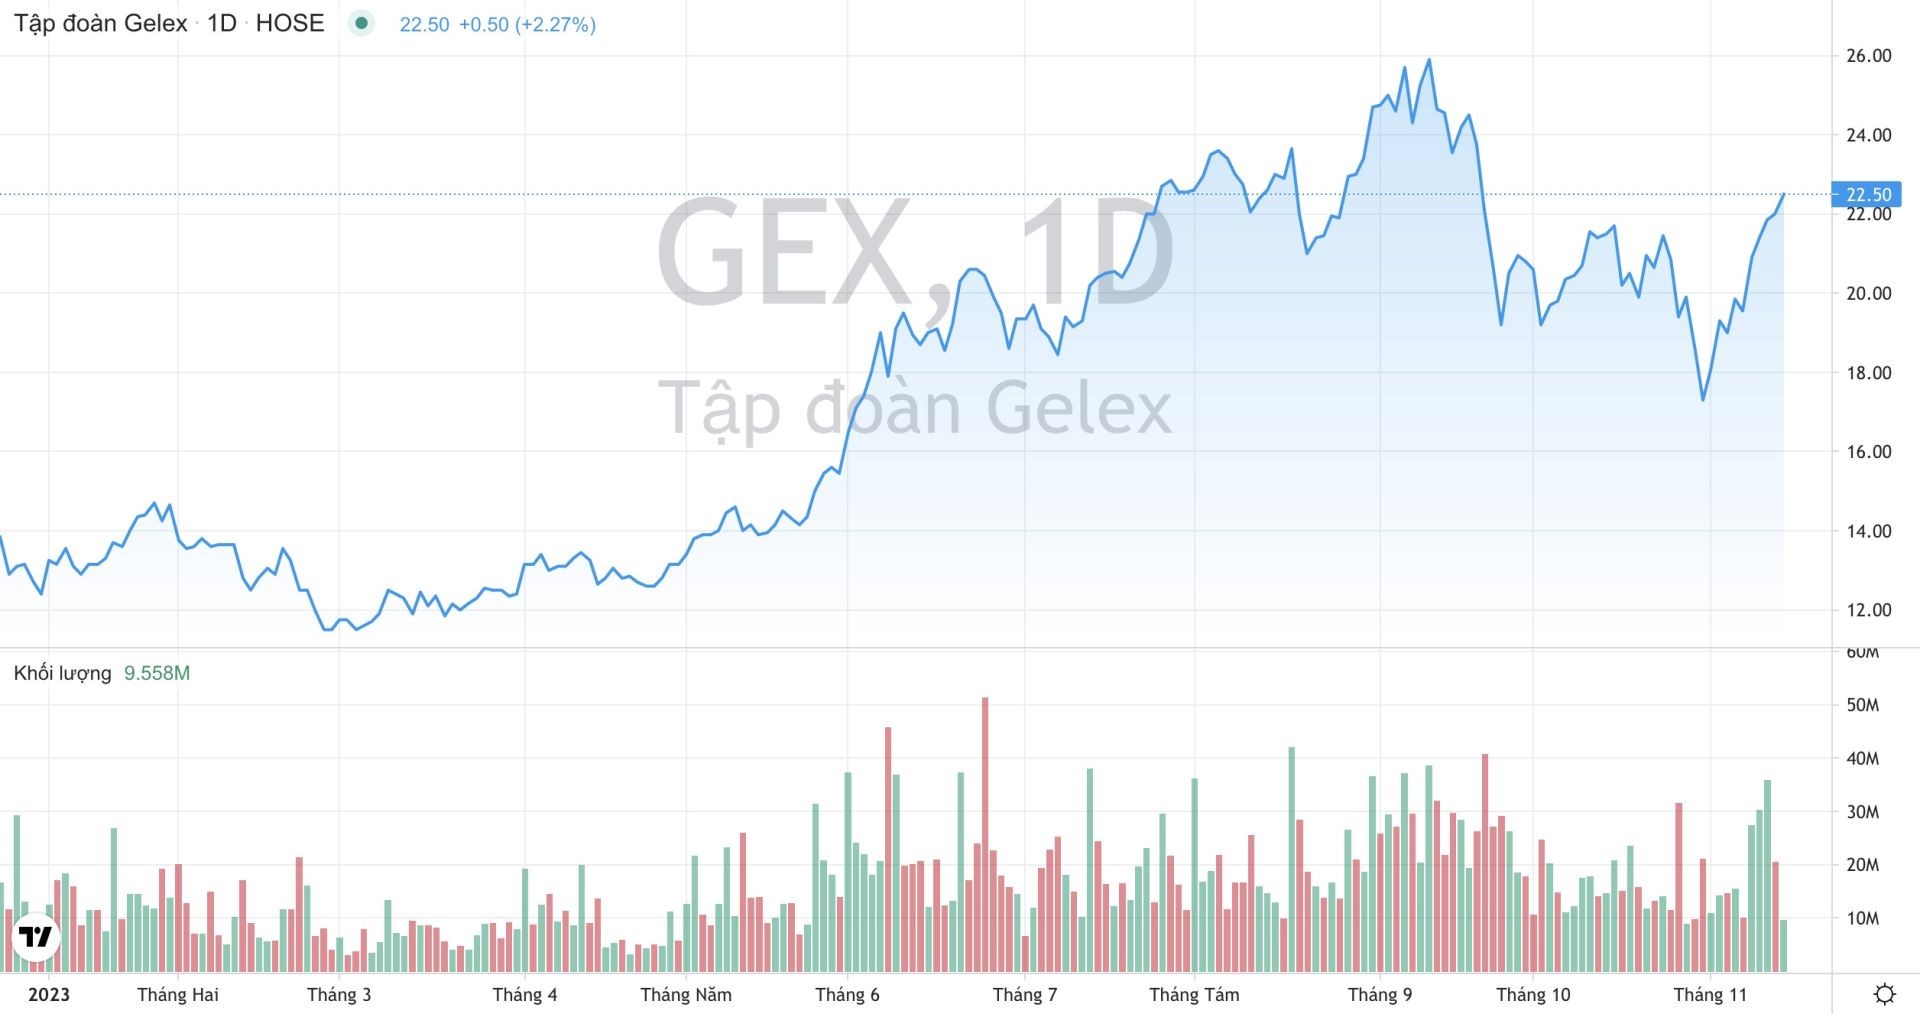 Trading volume and price trend of GEX shares of GELEX Group from the beginning of 2023 to the present. (Source: TradingView).